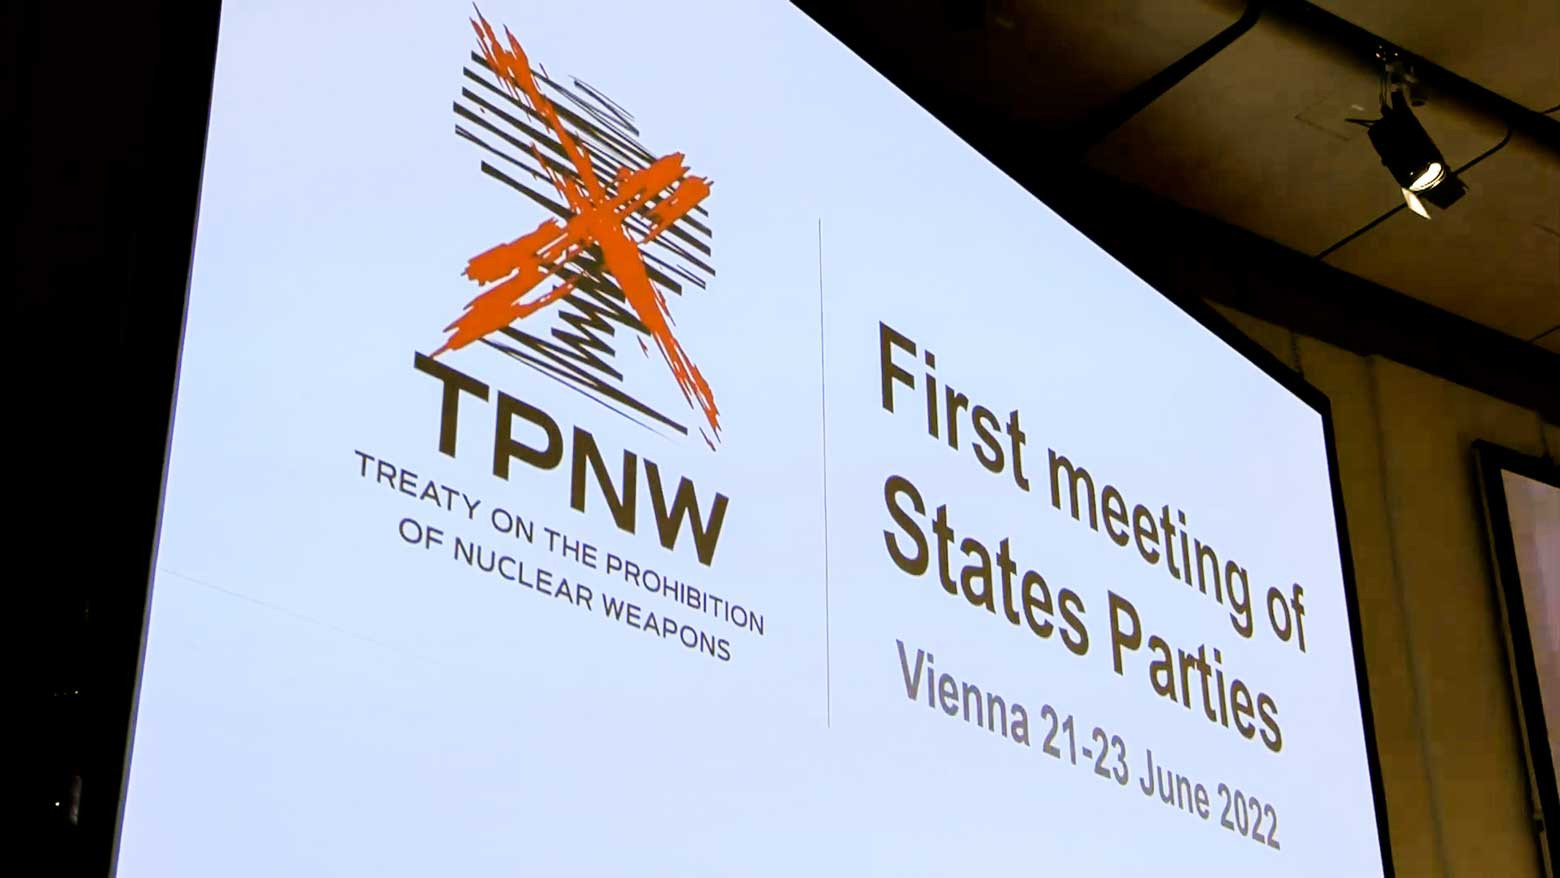 Vienna talks on banning nuclear weapons come at critical juncture